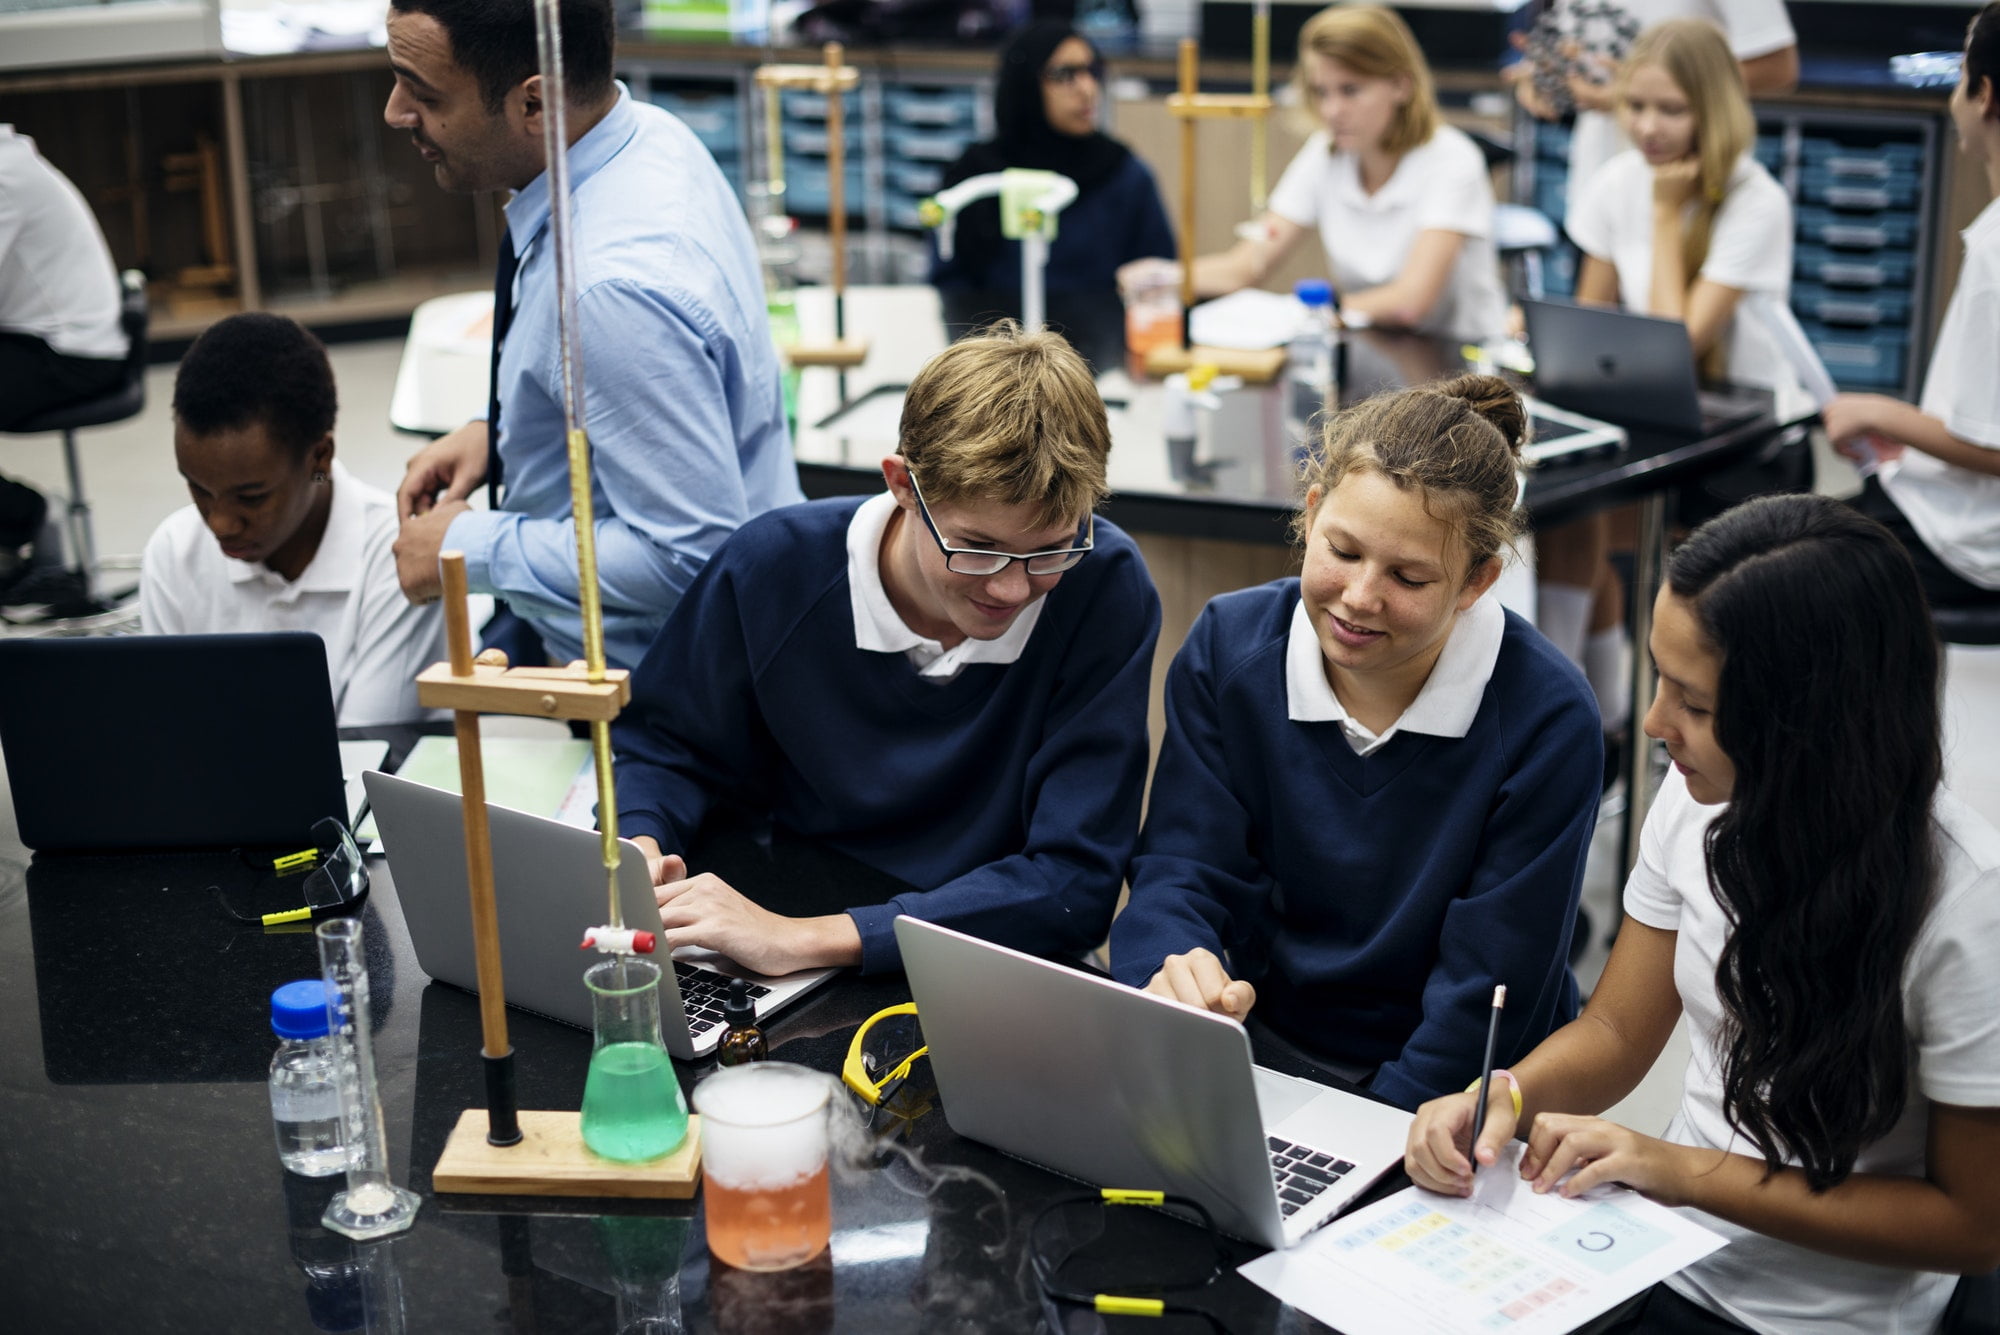 group-of-students-laboratory-lab-in-science-classroom.jpg